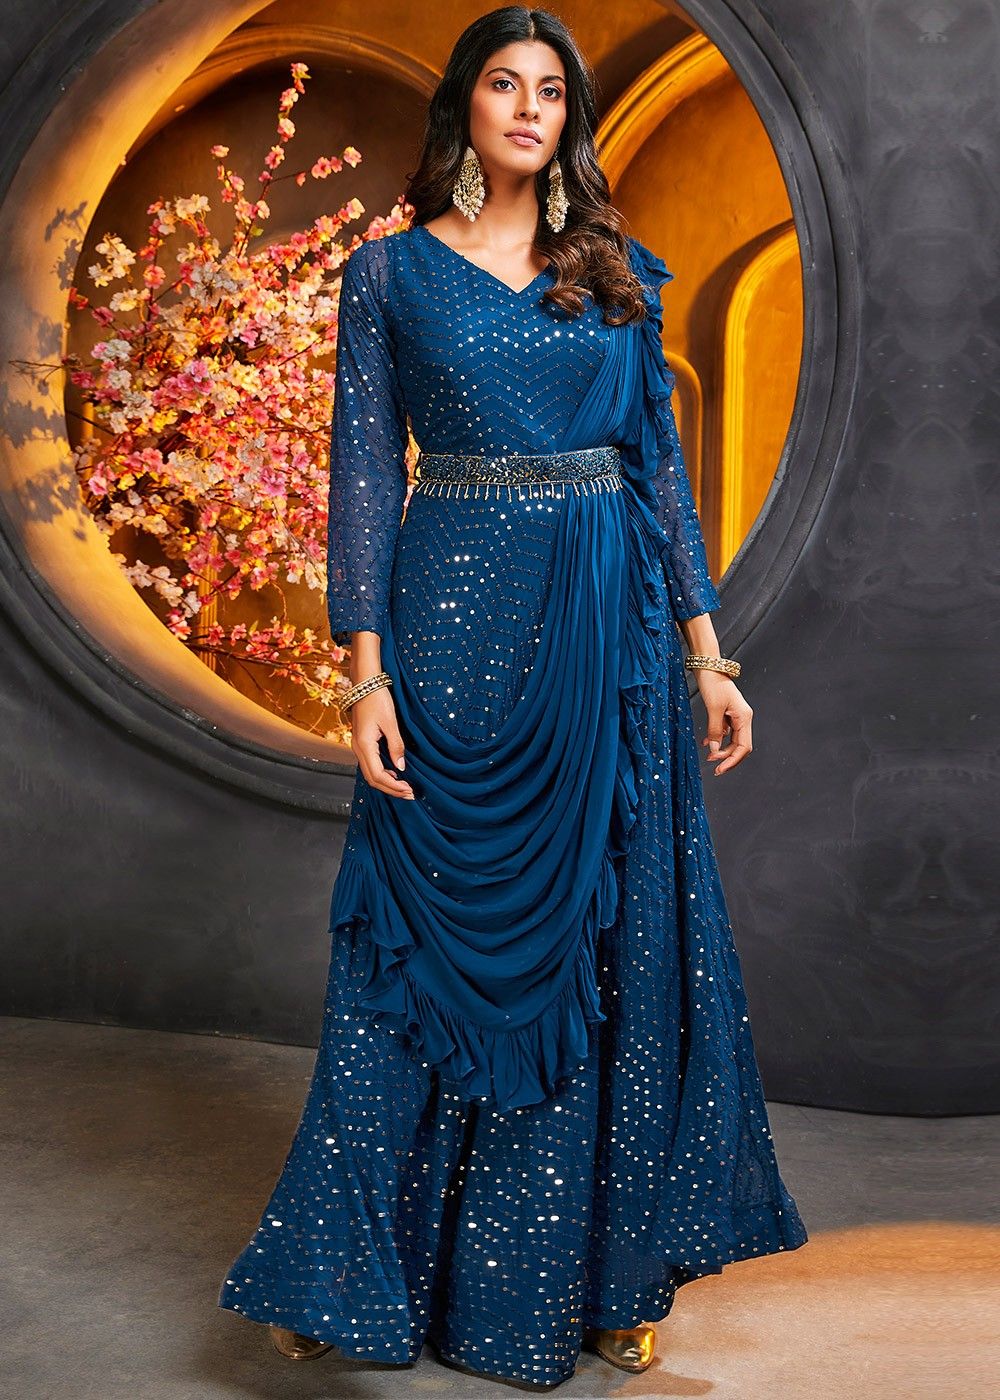 Girls Clothing | Beautiful Gown Dress With Attached Dupatta | Freeup-hdcinema.vn